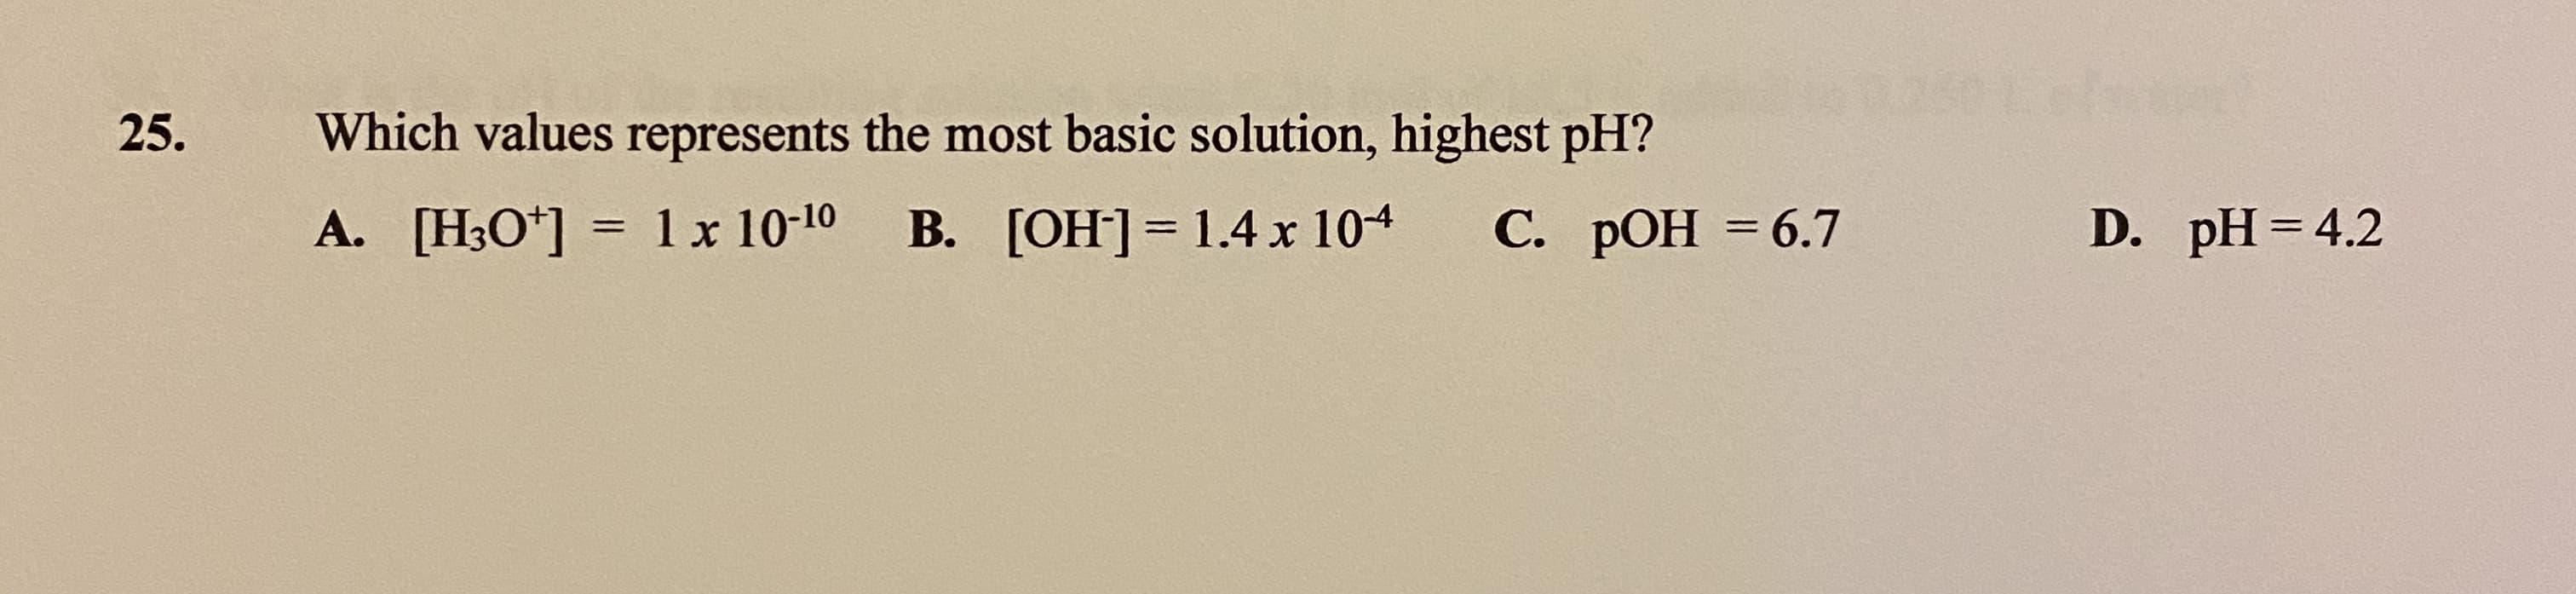 25.
Which values represents the most basic solution, highest pH?
A. [H3O*]
1 x 10-10
B. [OH]= 1.4 x 104
С. РОН %3 6.7
D. pH =4.2
